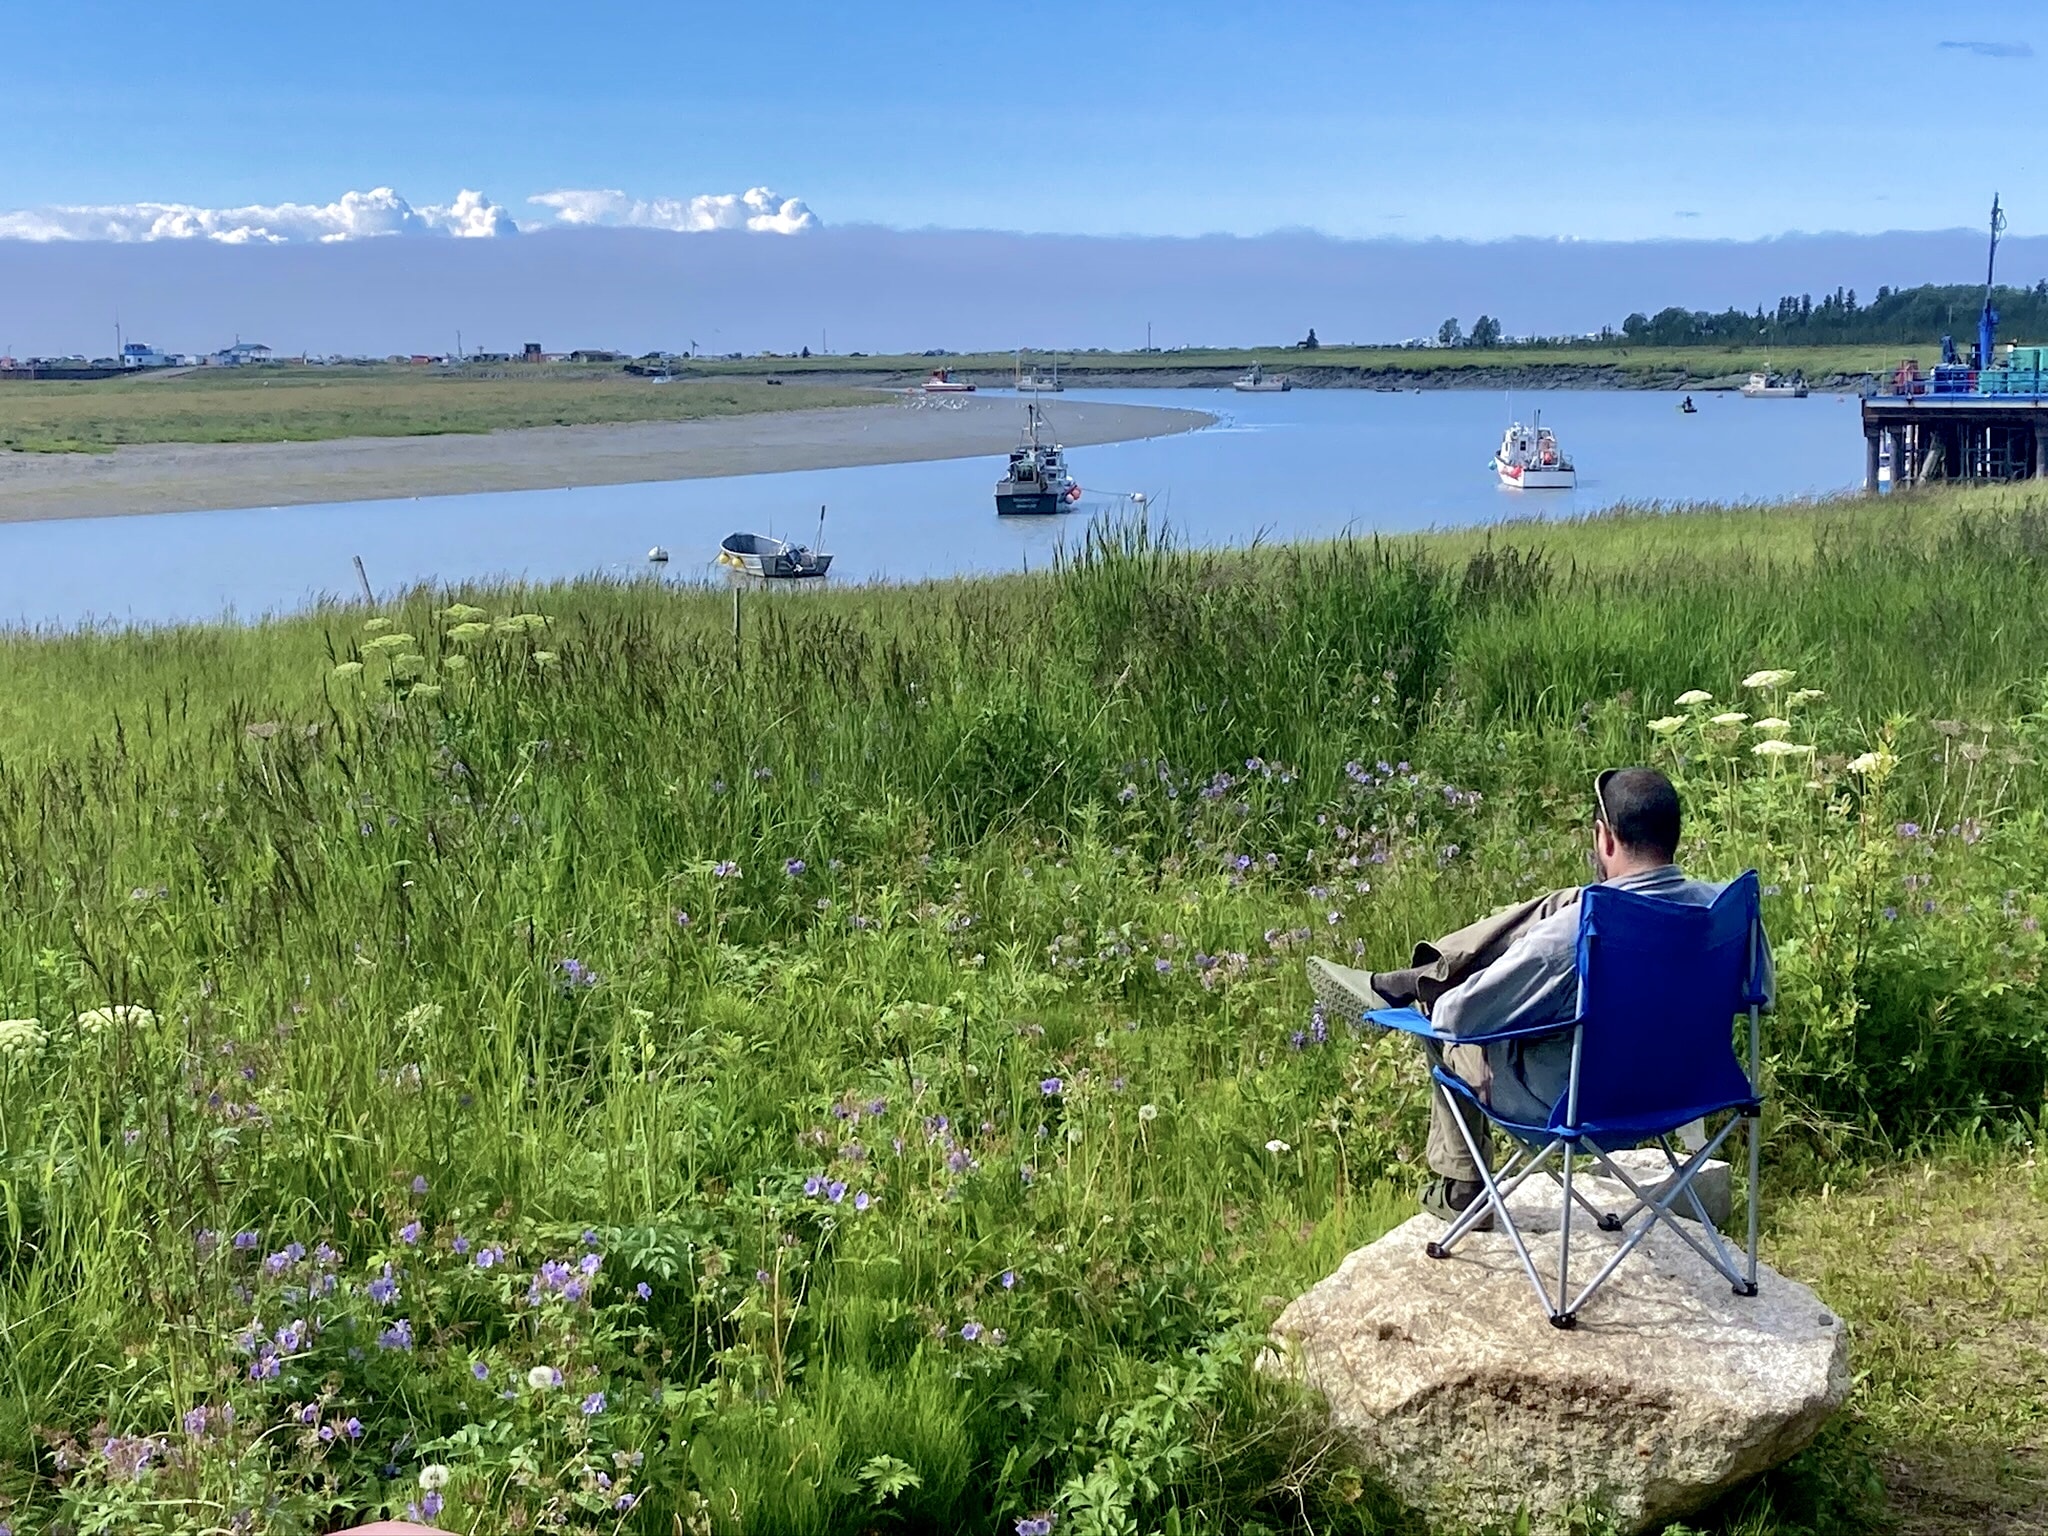 Man in a Camping Chair overlooking Boats in Alaska